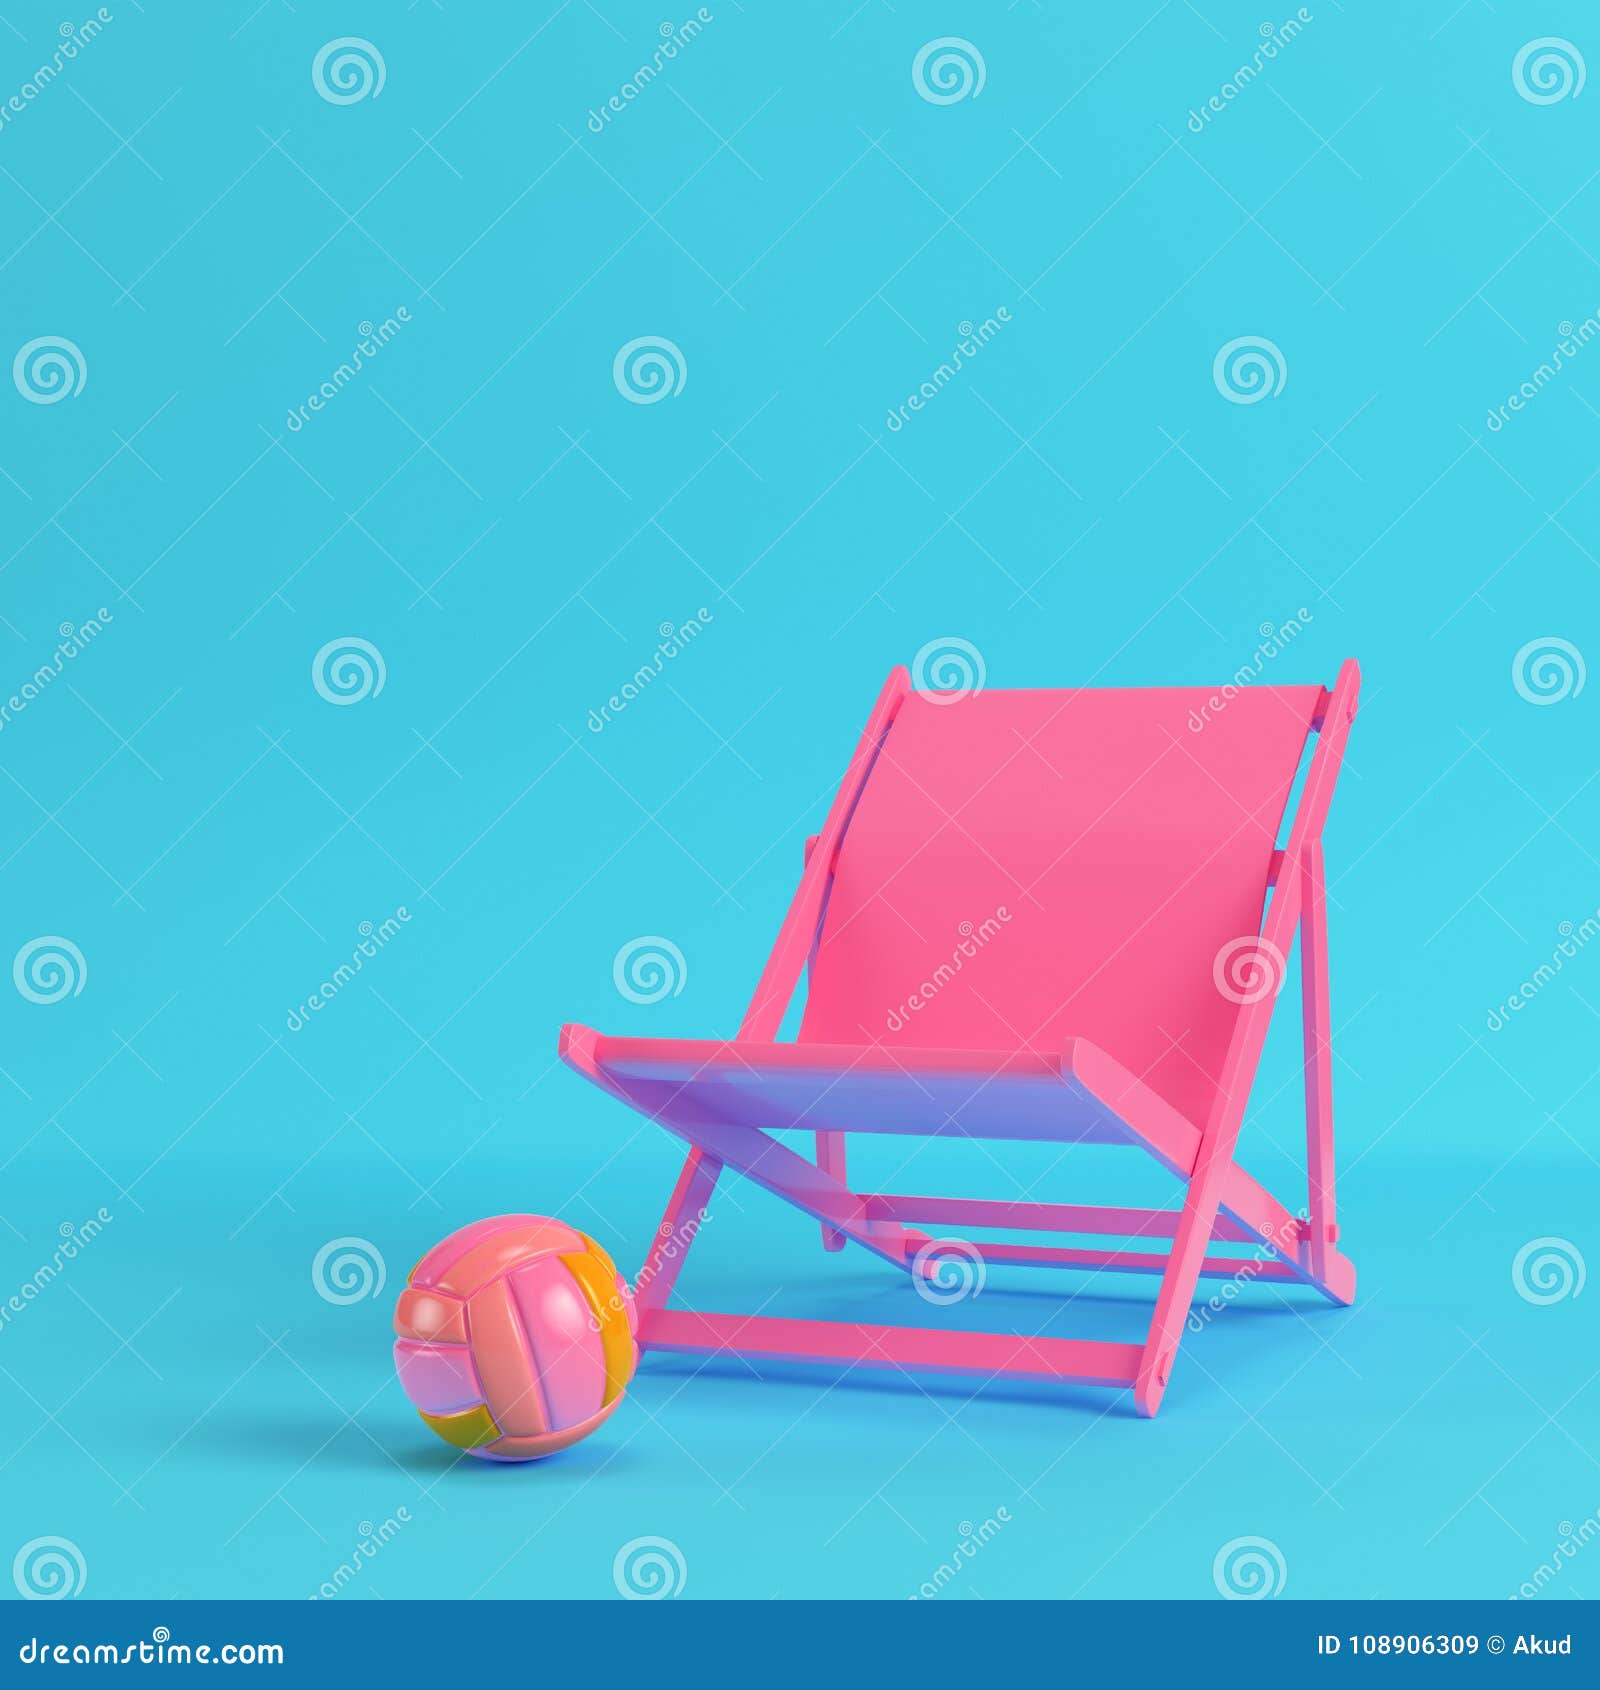 Pink Beach Chair With Volleyball Ball On Bright Blue